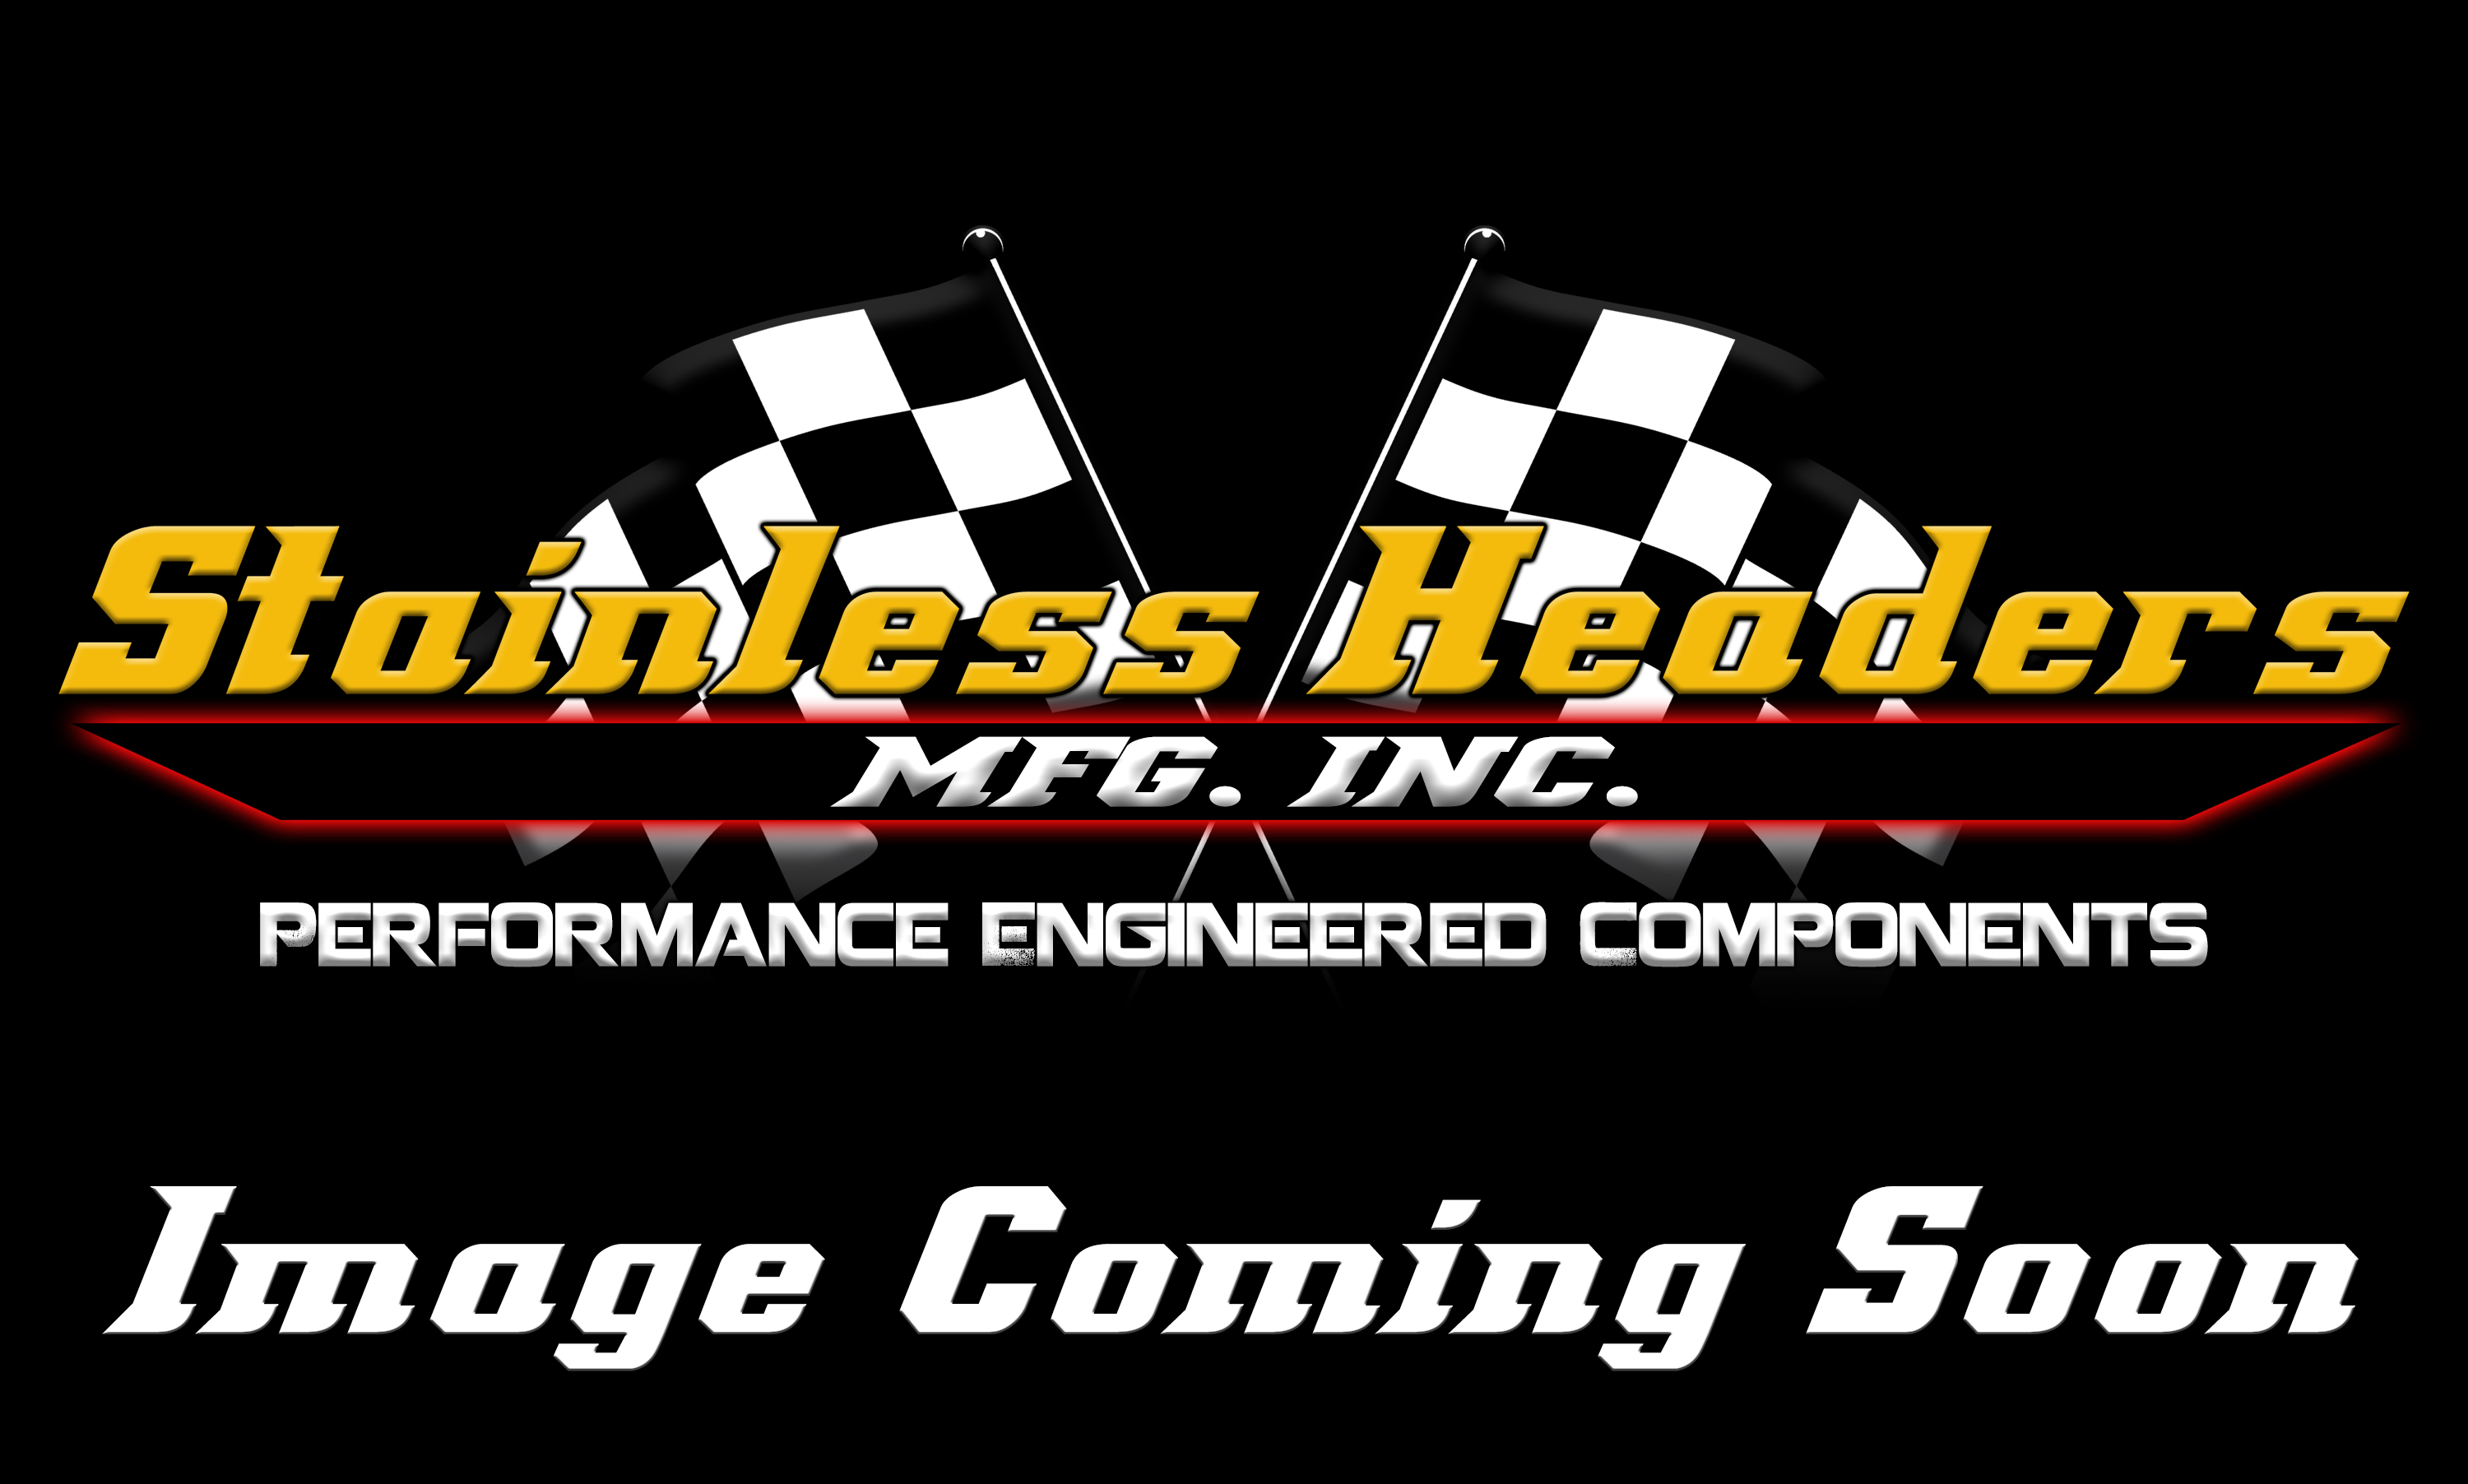 Stainless Headers - Small Block Mopar 318 Poly Head Stainless Header Flange-Round Port